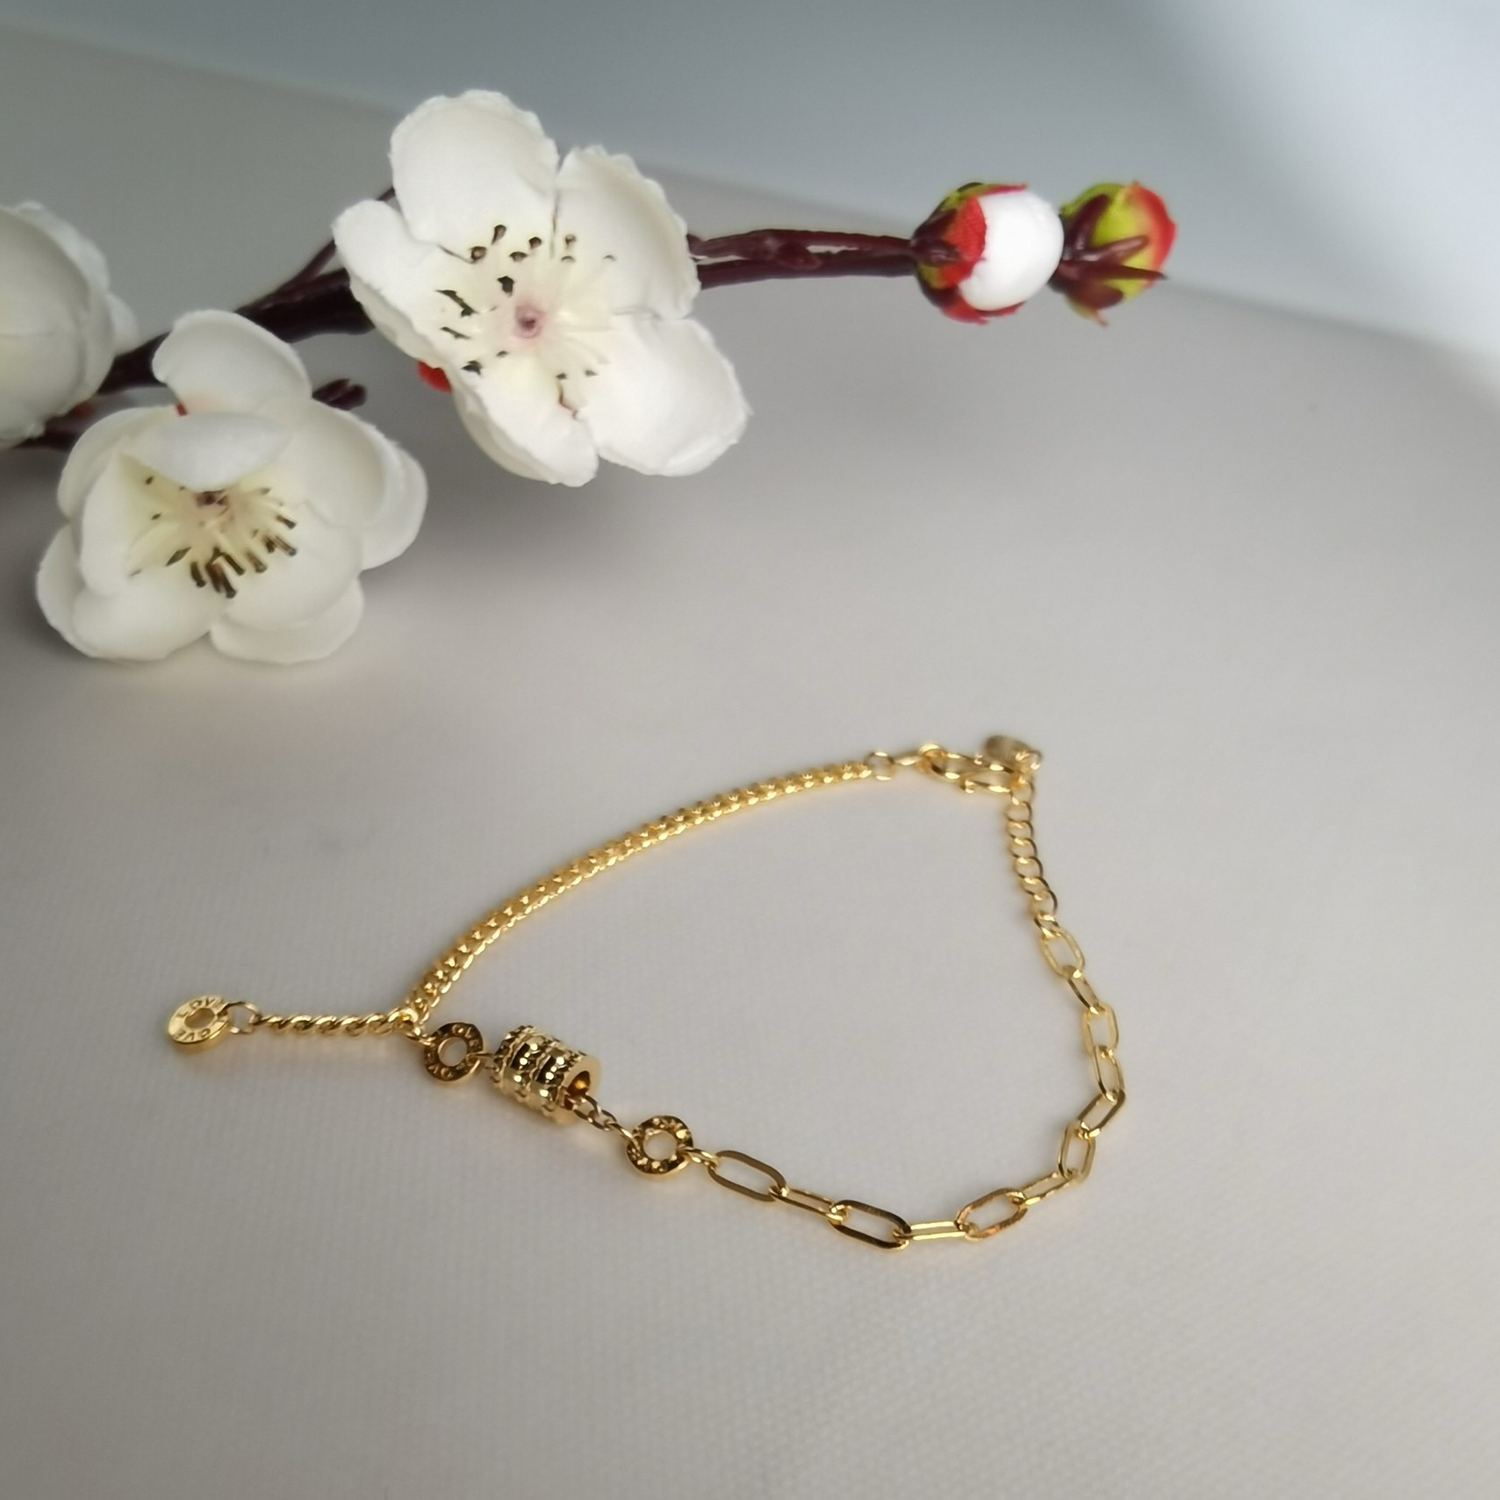 Alluvial Gold Vacuum Electroplating 24K Gold AB Chain Small Waist Bracelet